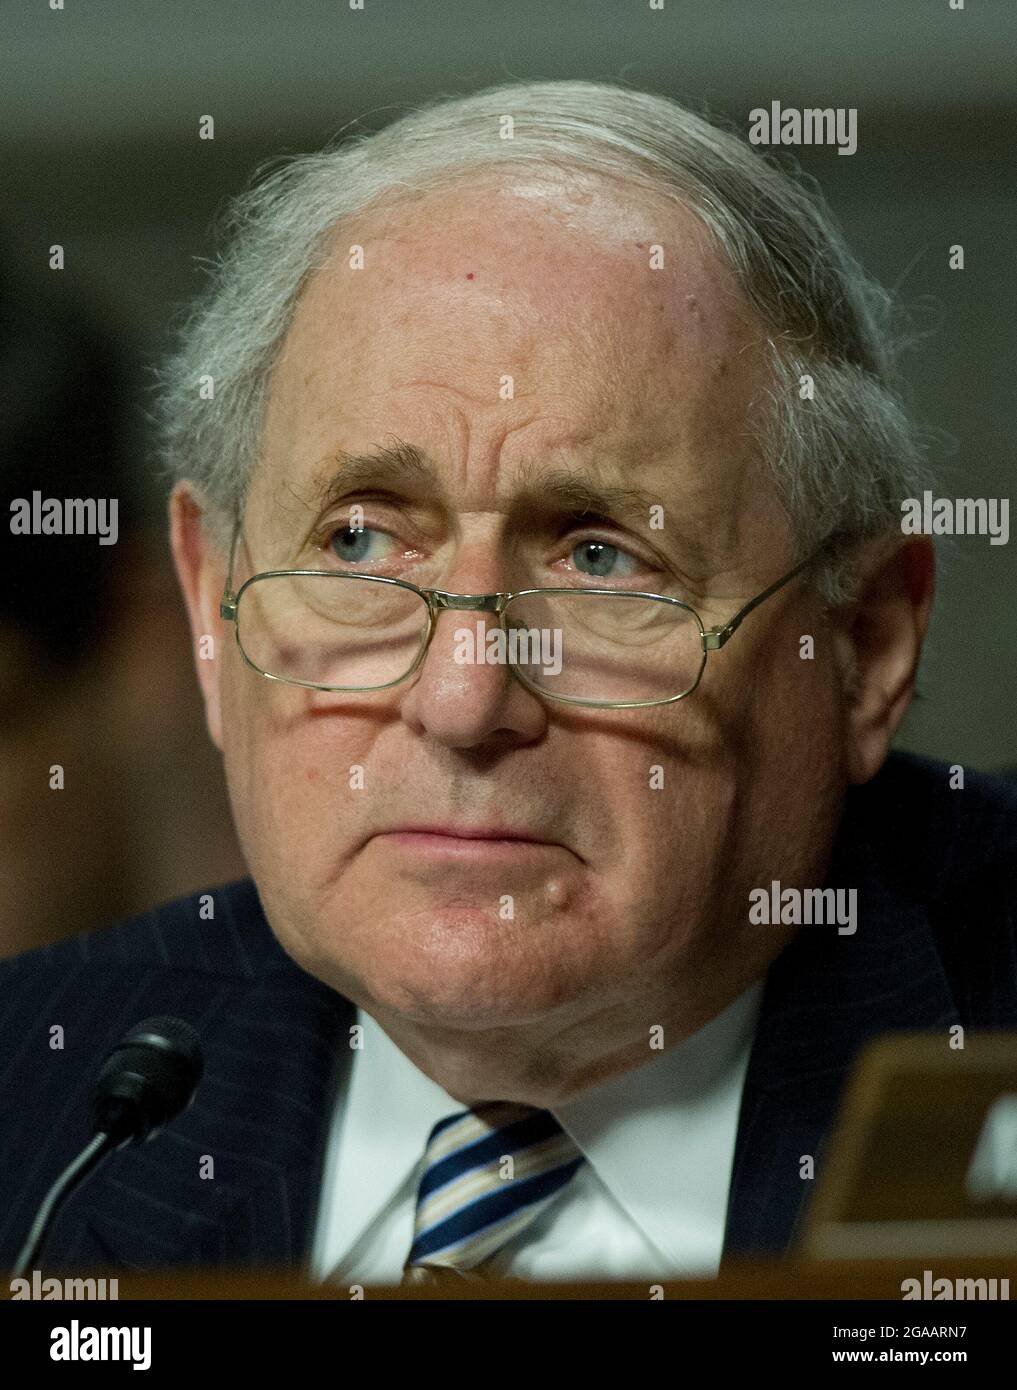 United States Senator Carl Levin (Democrat of Michigan), Chairman, U.S. Senate Armed Services Committee, listens as General John R. Allen, USMC, Commander, International Security Assistance Force and Commander, United States Forces Afghanistan, testifies before the committee on the situation in Afghanistan on Capitol Hill in Washington, DC on Thursday, March 22, 2012.Credit: Ron Sachs/CNP/MediaPunch Stock Photo